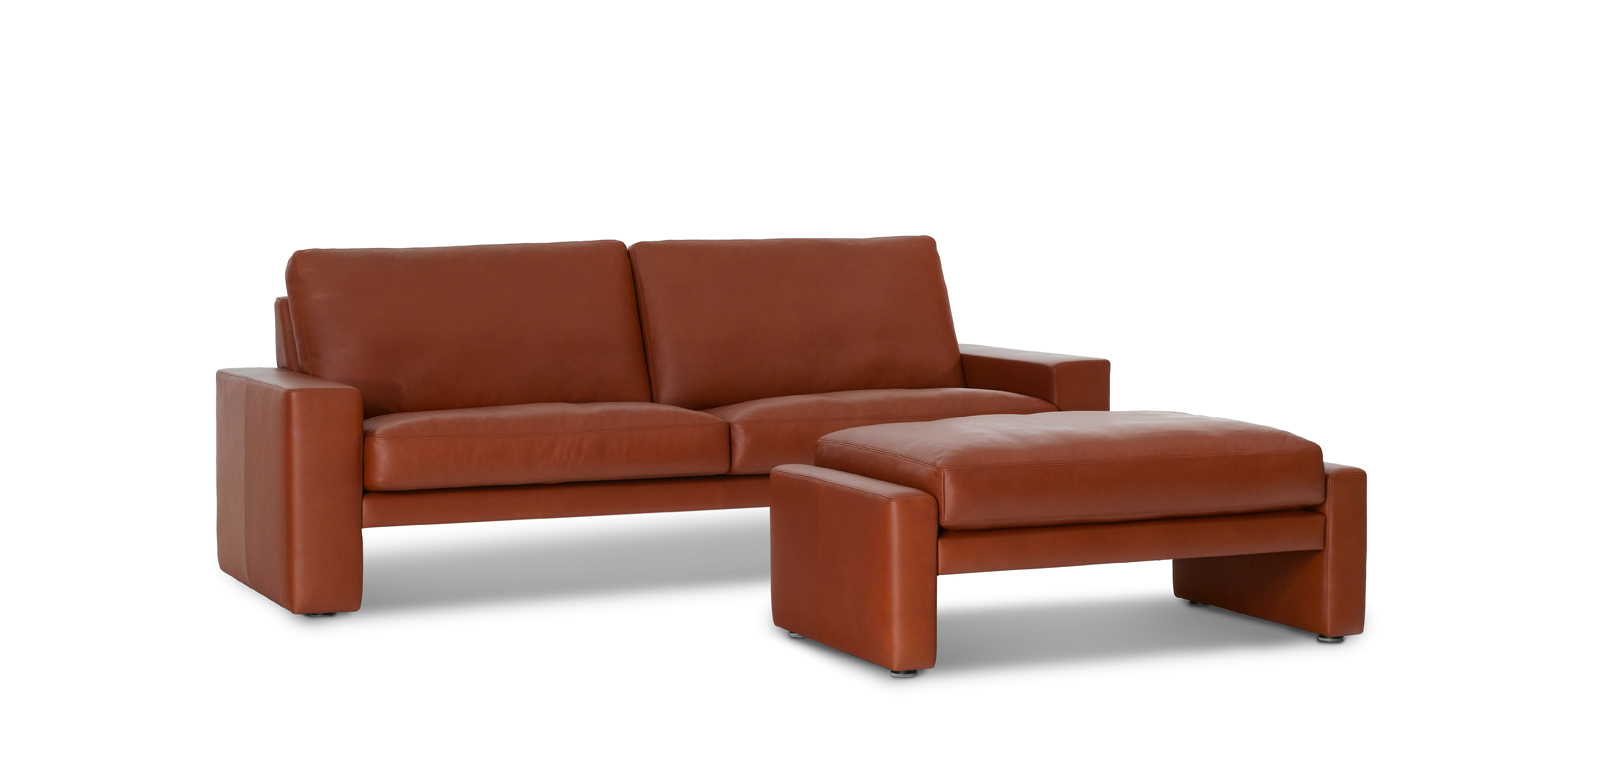 Oblique view of CL100 in brown leather with matching stool.